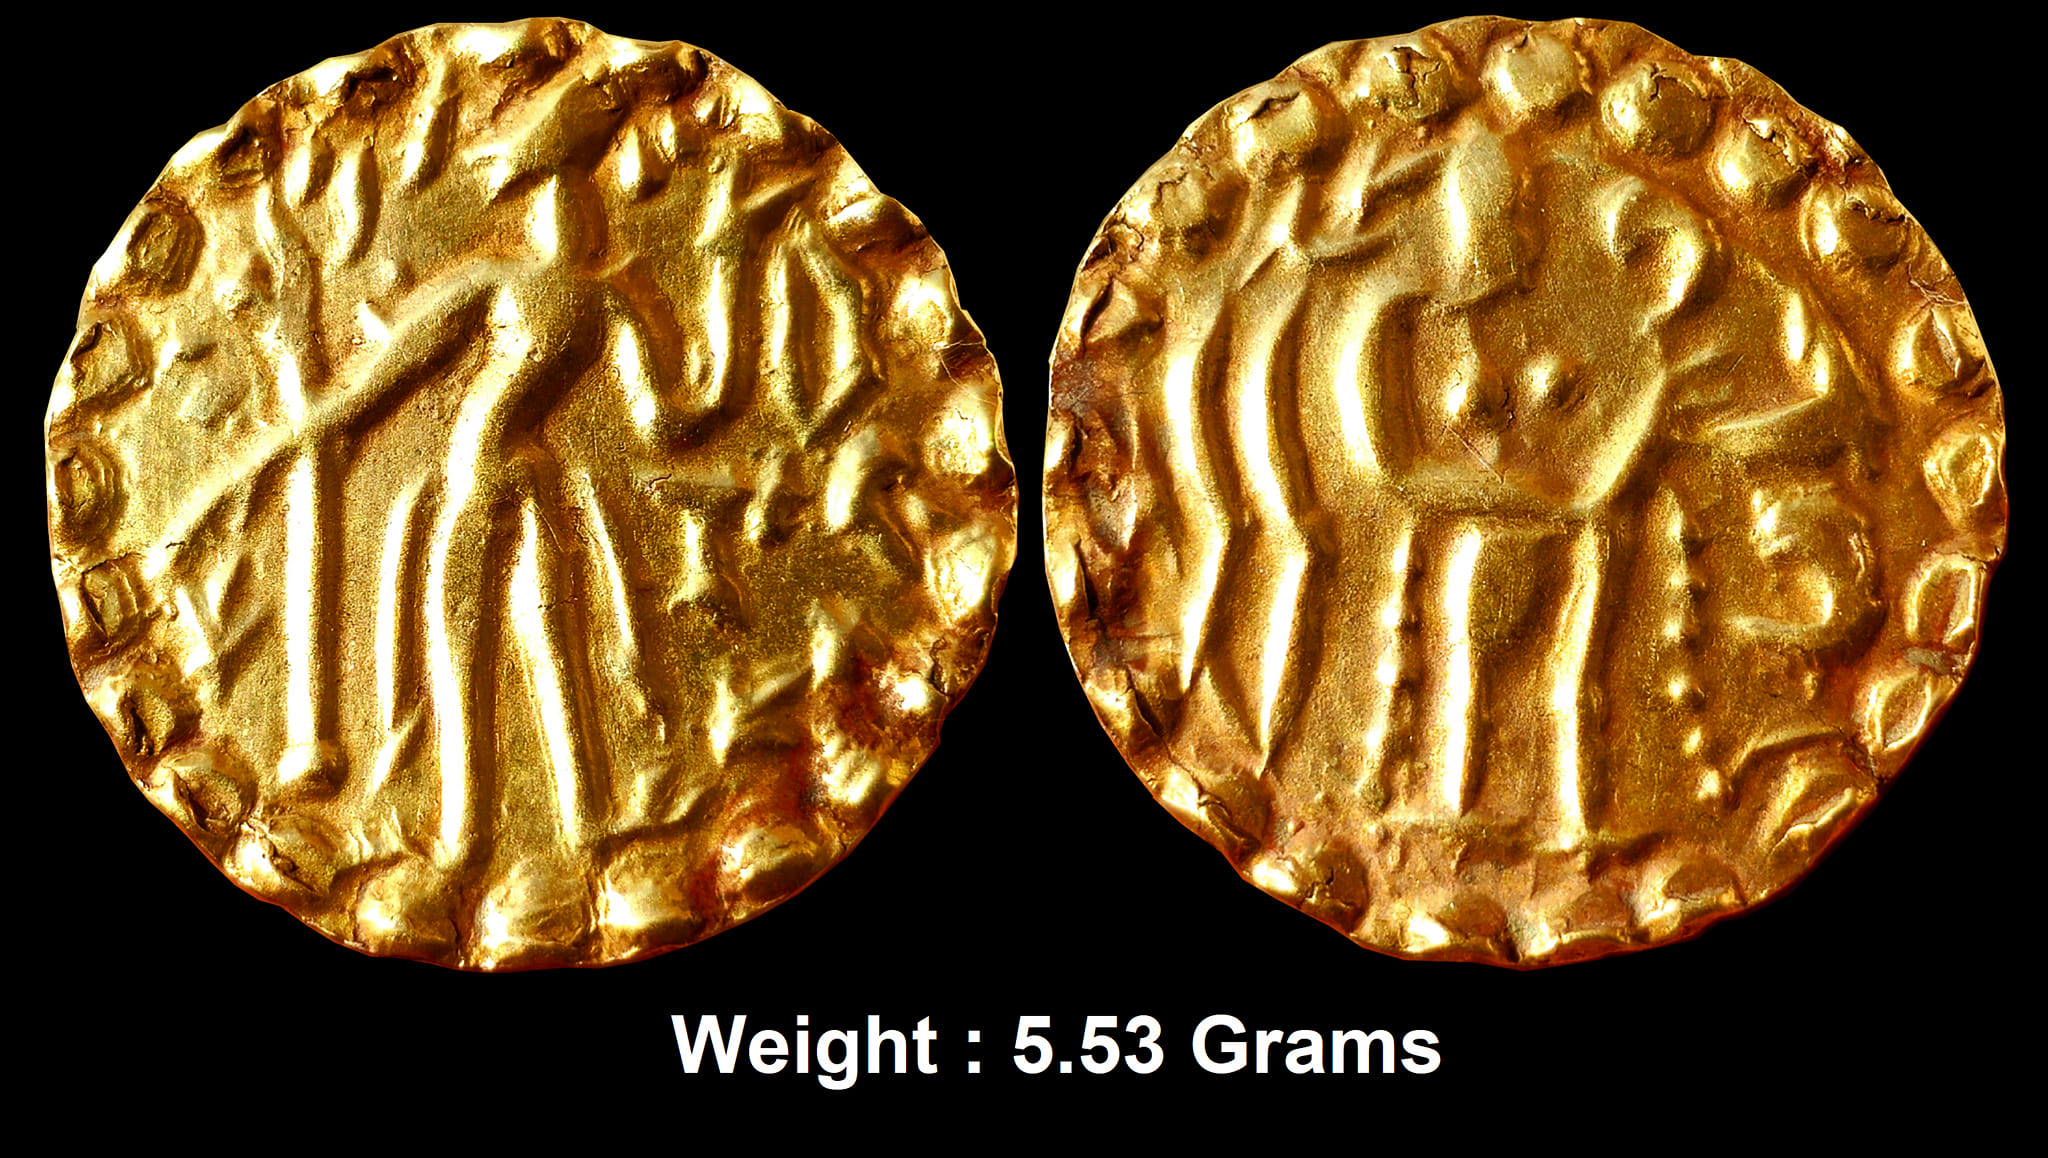 Samatata region, Gold coinage of the post-Gupta period - Gold dinar of Sridharana Rata of Rata dynasty (c. 664-675 AD), ECB SAM15.1, Weight : 5.53 Grams 
Obv: Stylised representation of a nimbate 'archer' type king, holding bow in one hand and arrow in the other, with a crudely executed 'Shankha' standard in the backdrop and Brahmi letter Shri to the left of the head; Brahmi letter Shri below the hand with bow. 
Rev: Stylised representation of goddess, facing right, making a gesture of reassurance, with curved lines (drapery?) behind her back; crude inscription to right.
Extremely fine, Very Rare